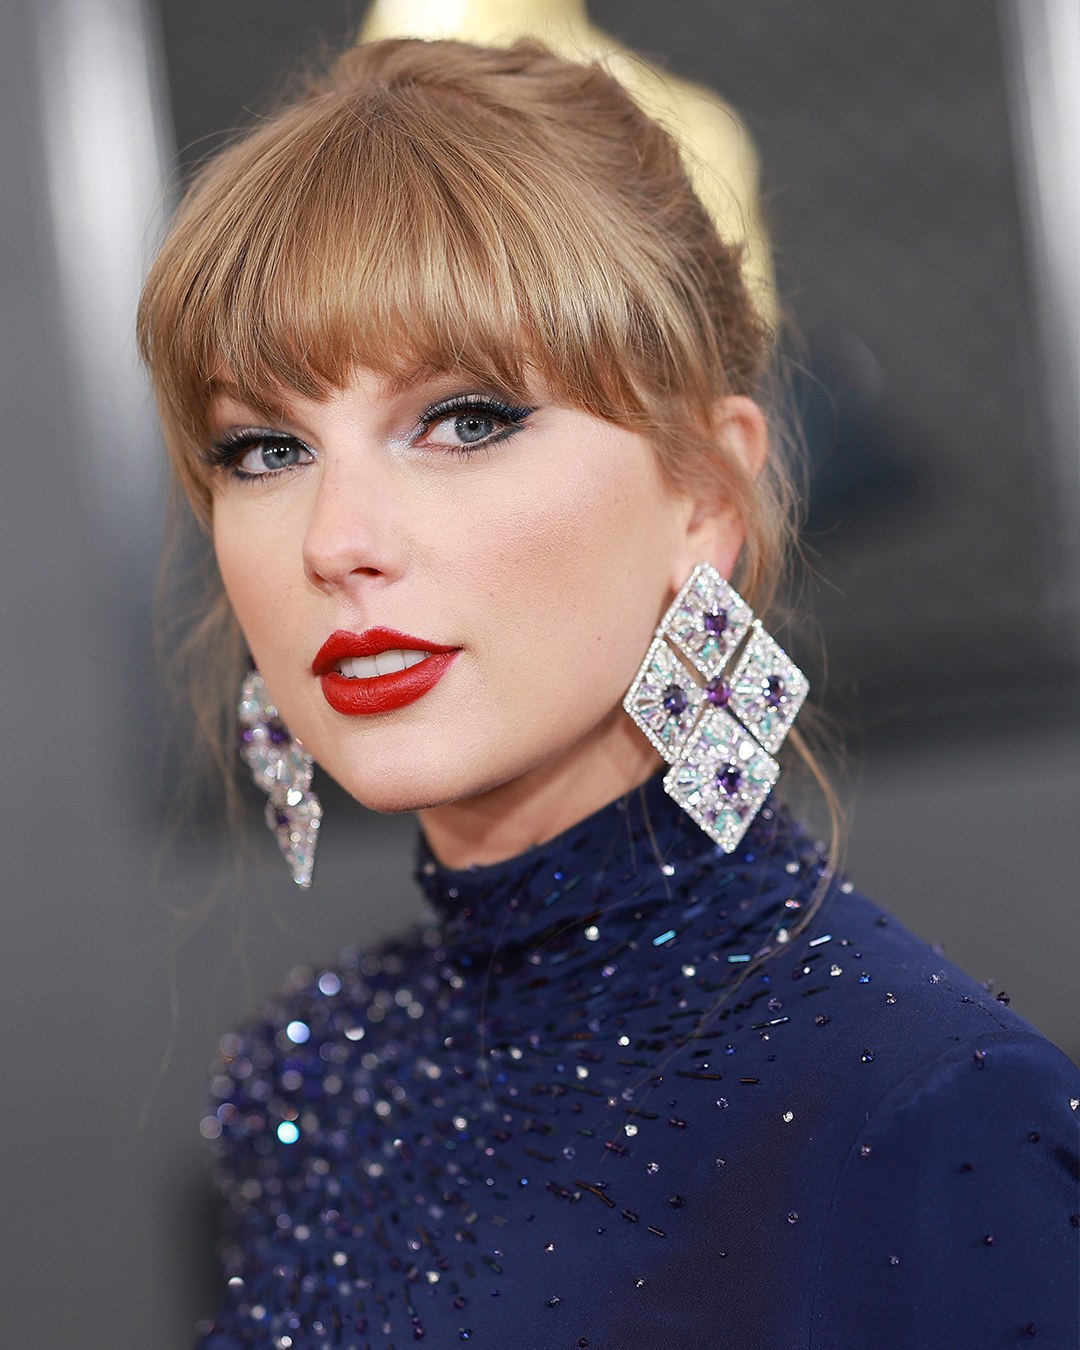 Taylor Swift Watch Necklace: What's the Story Behind Grammy Bling